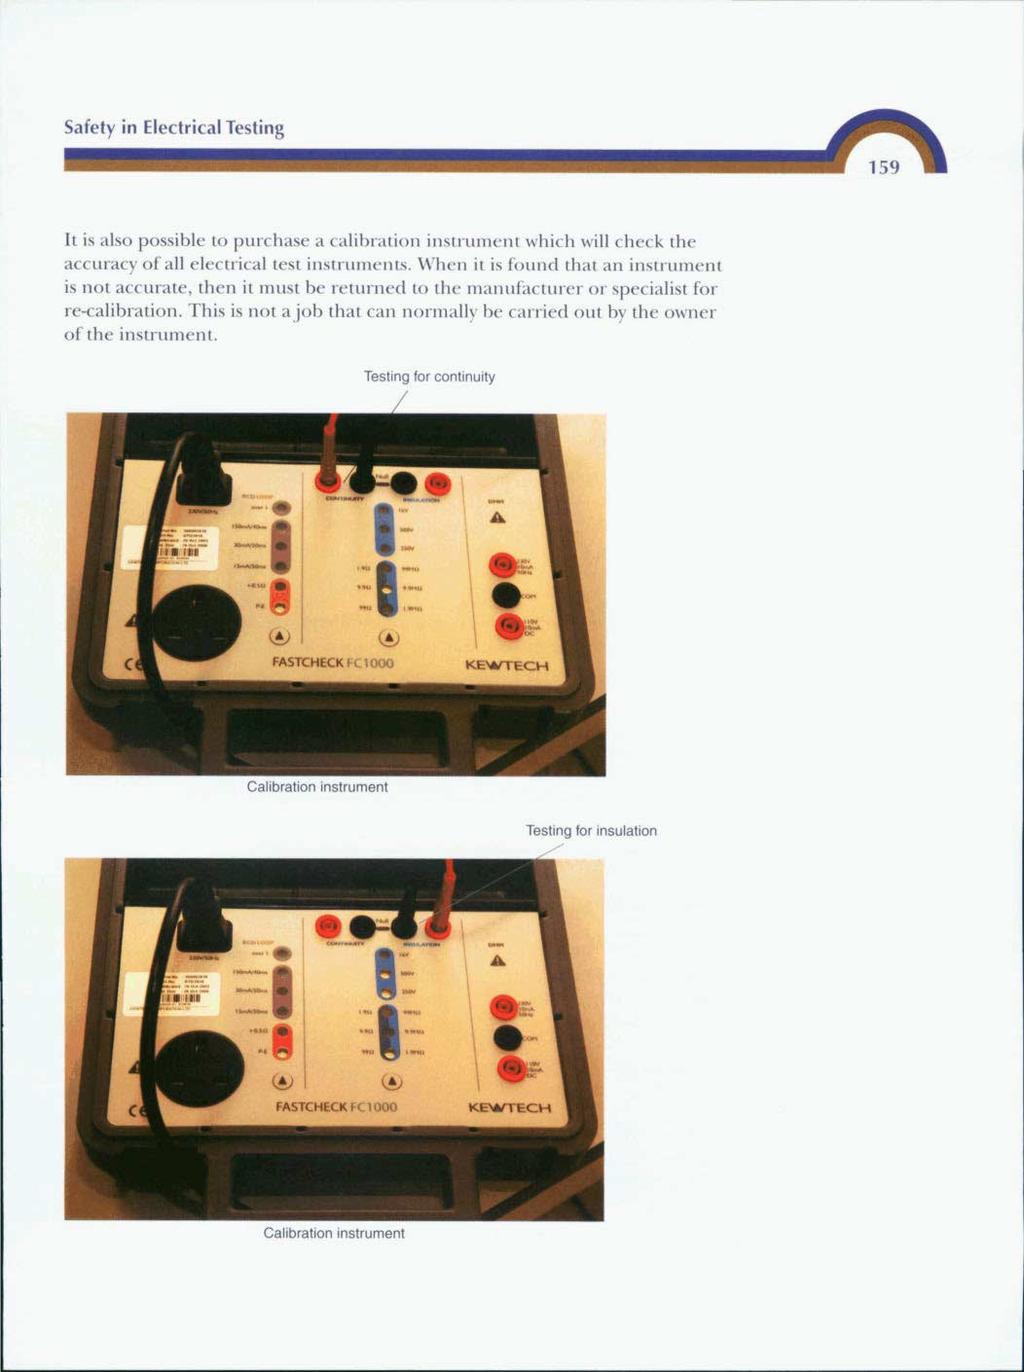 Safety in Electrical Testing I A n It is also possible to purchase a calibration instrument which will check the accuracy of all electrical test instruments.